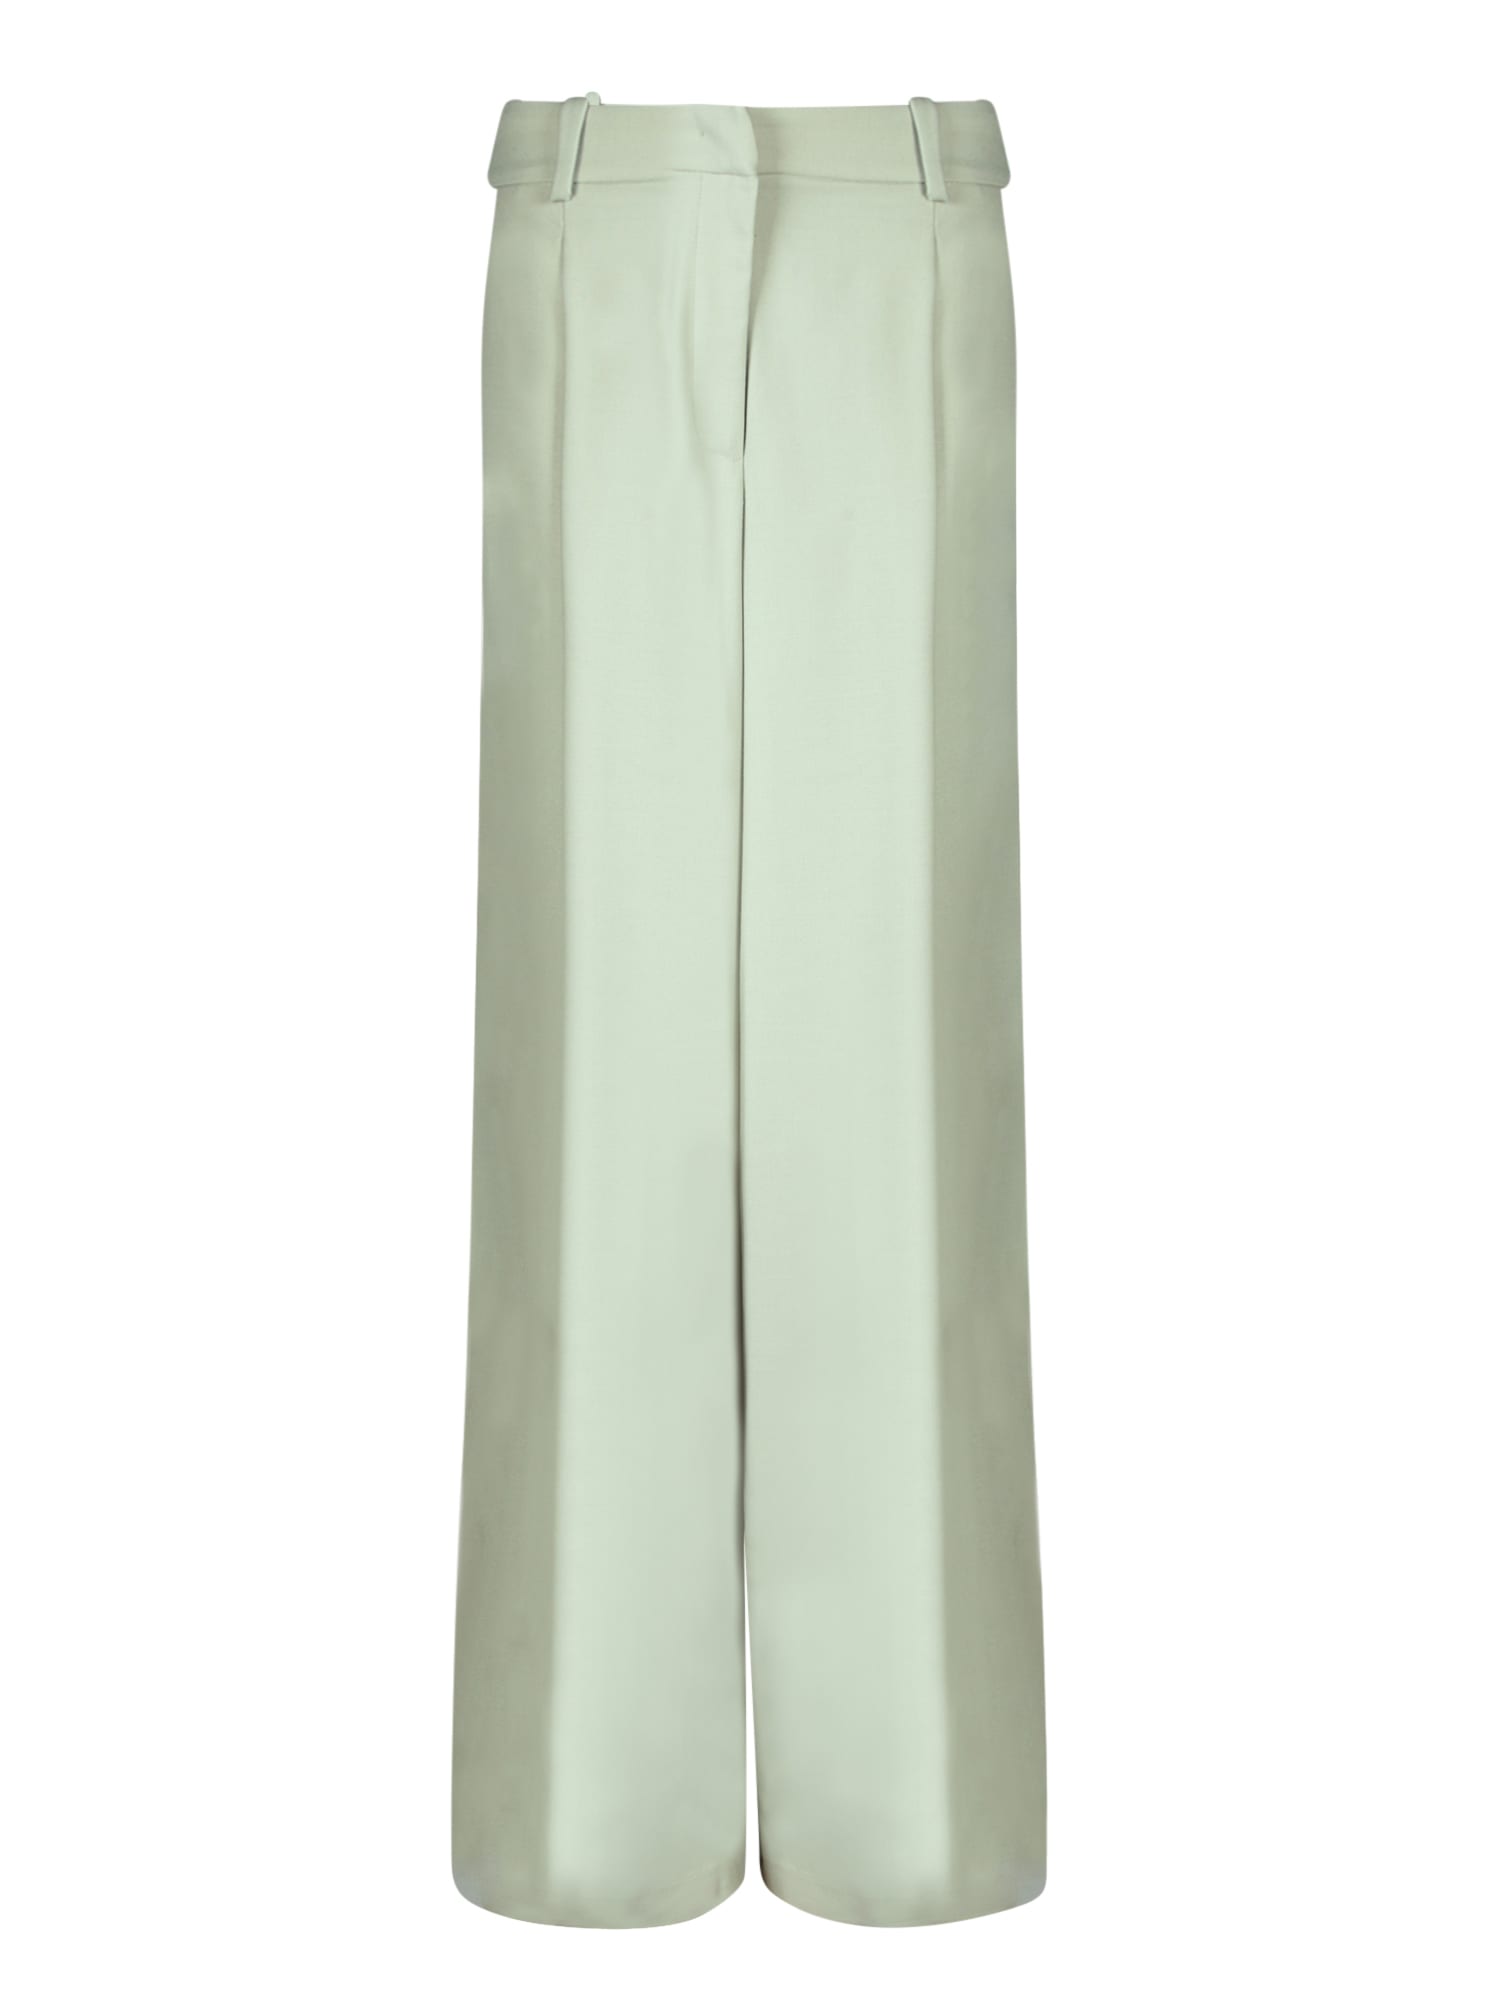 Shop Federica Tosi Sage Green Tailored Trousers